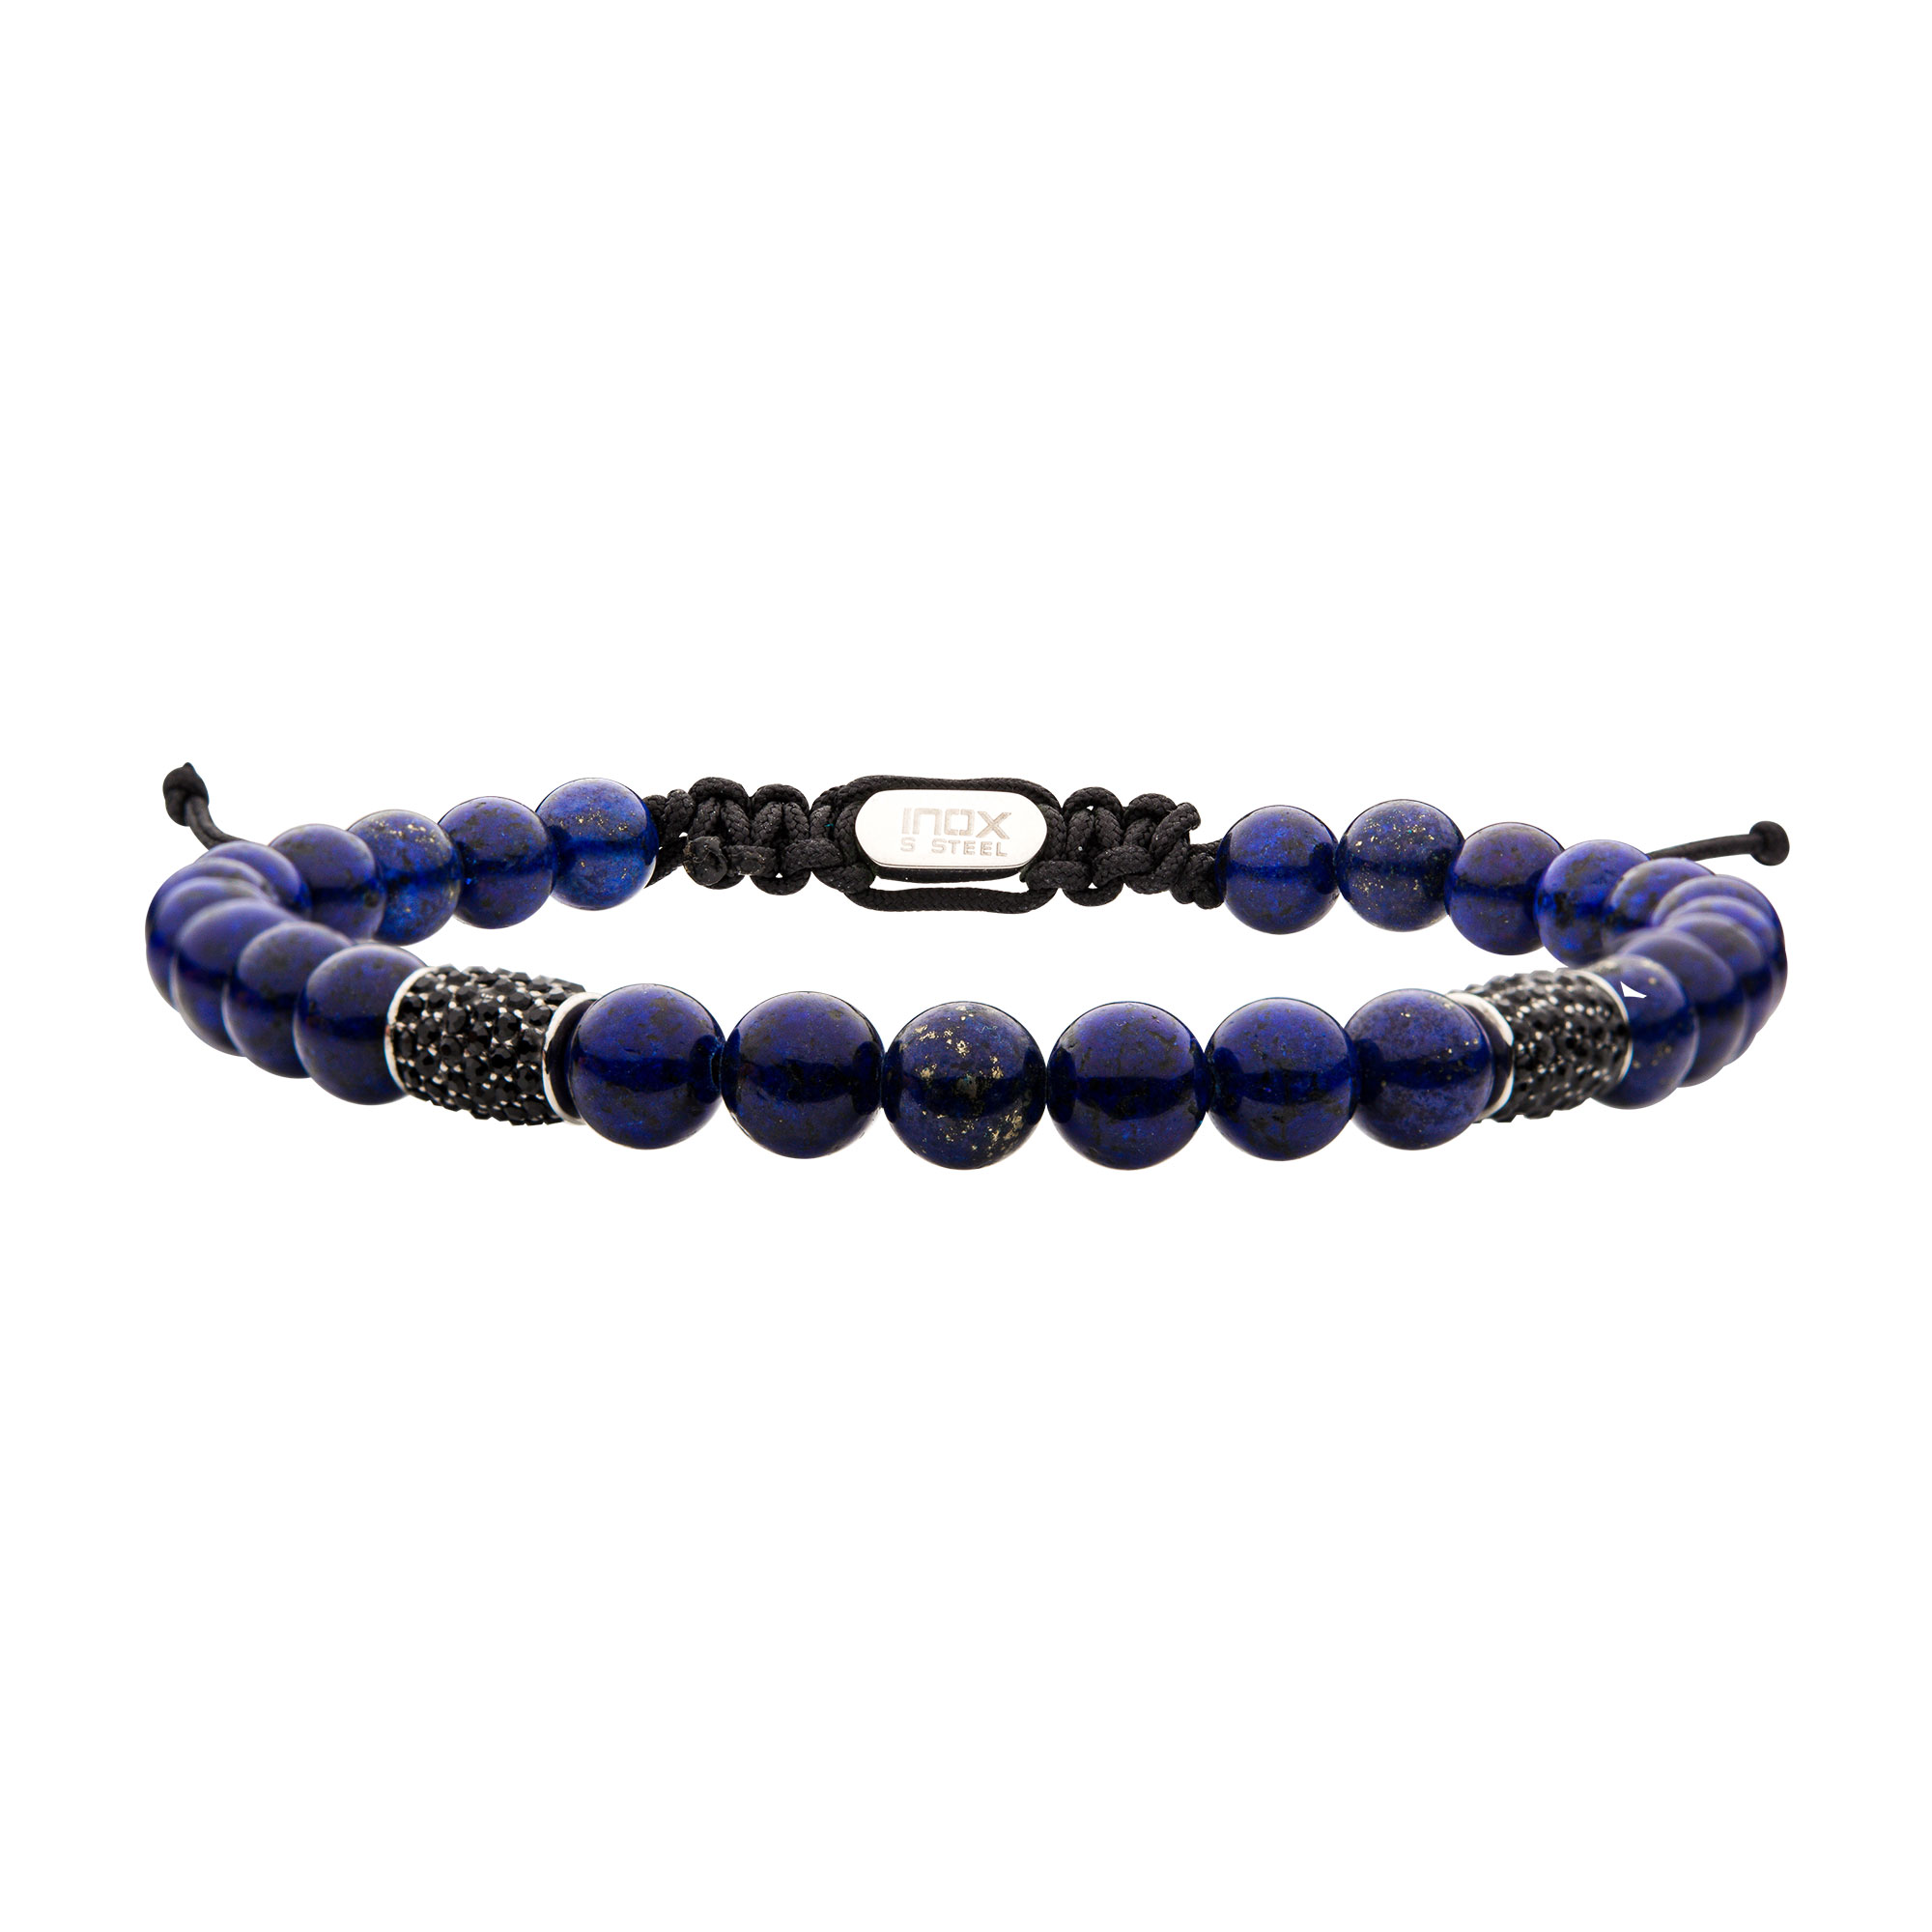 Stainless Steel Beads with Black CZ & Lapis Stone Bead Adjustable Non-Braided Bracelet Morin Jewelers Southbridge, MA